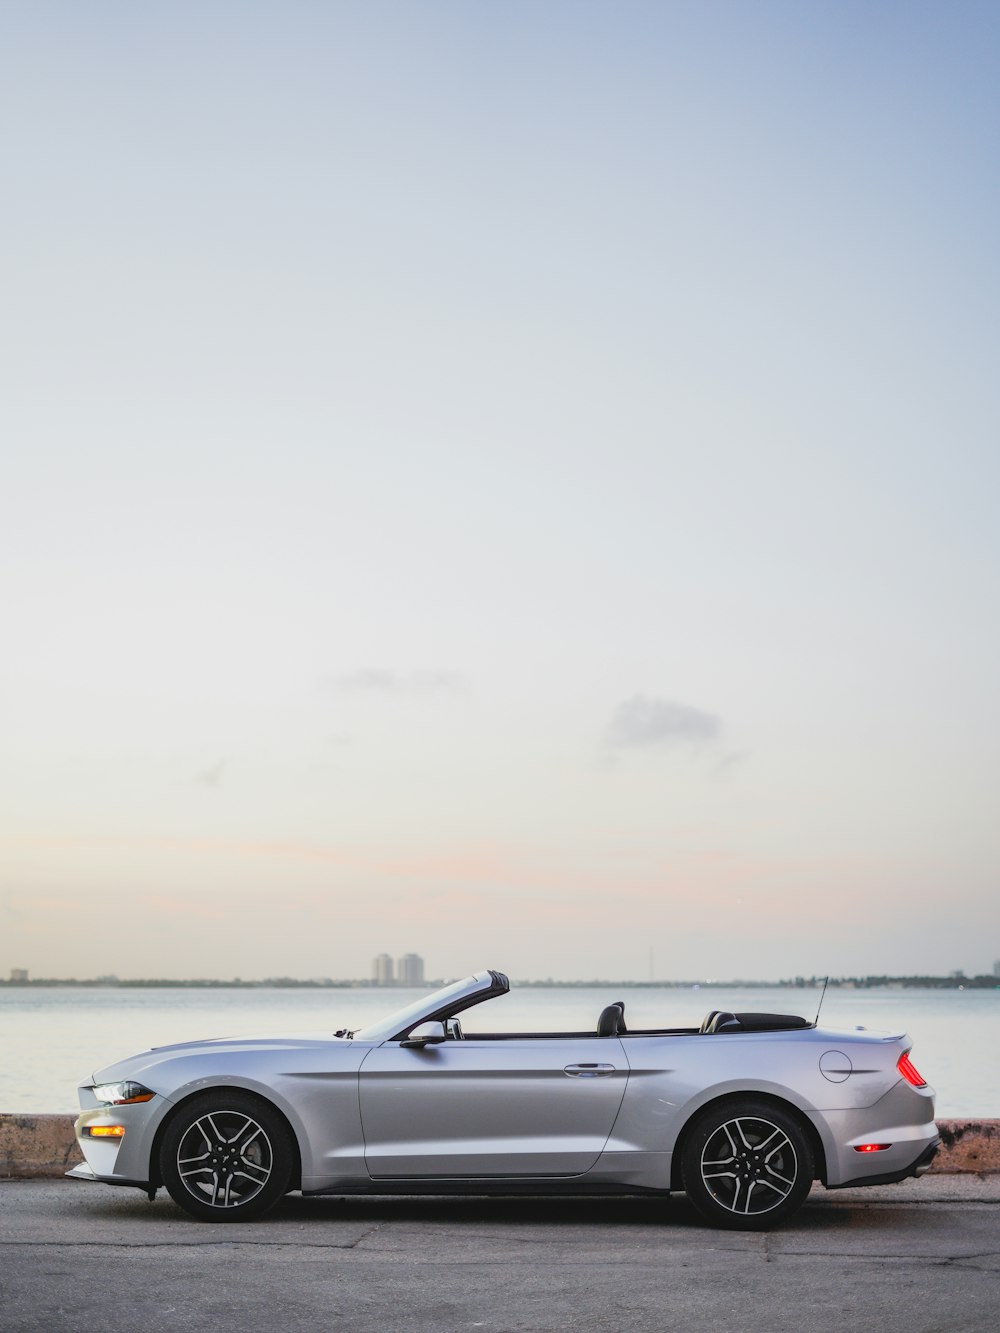 grey convertible car on beach during daytime